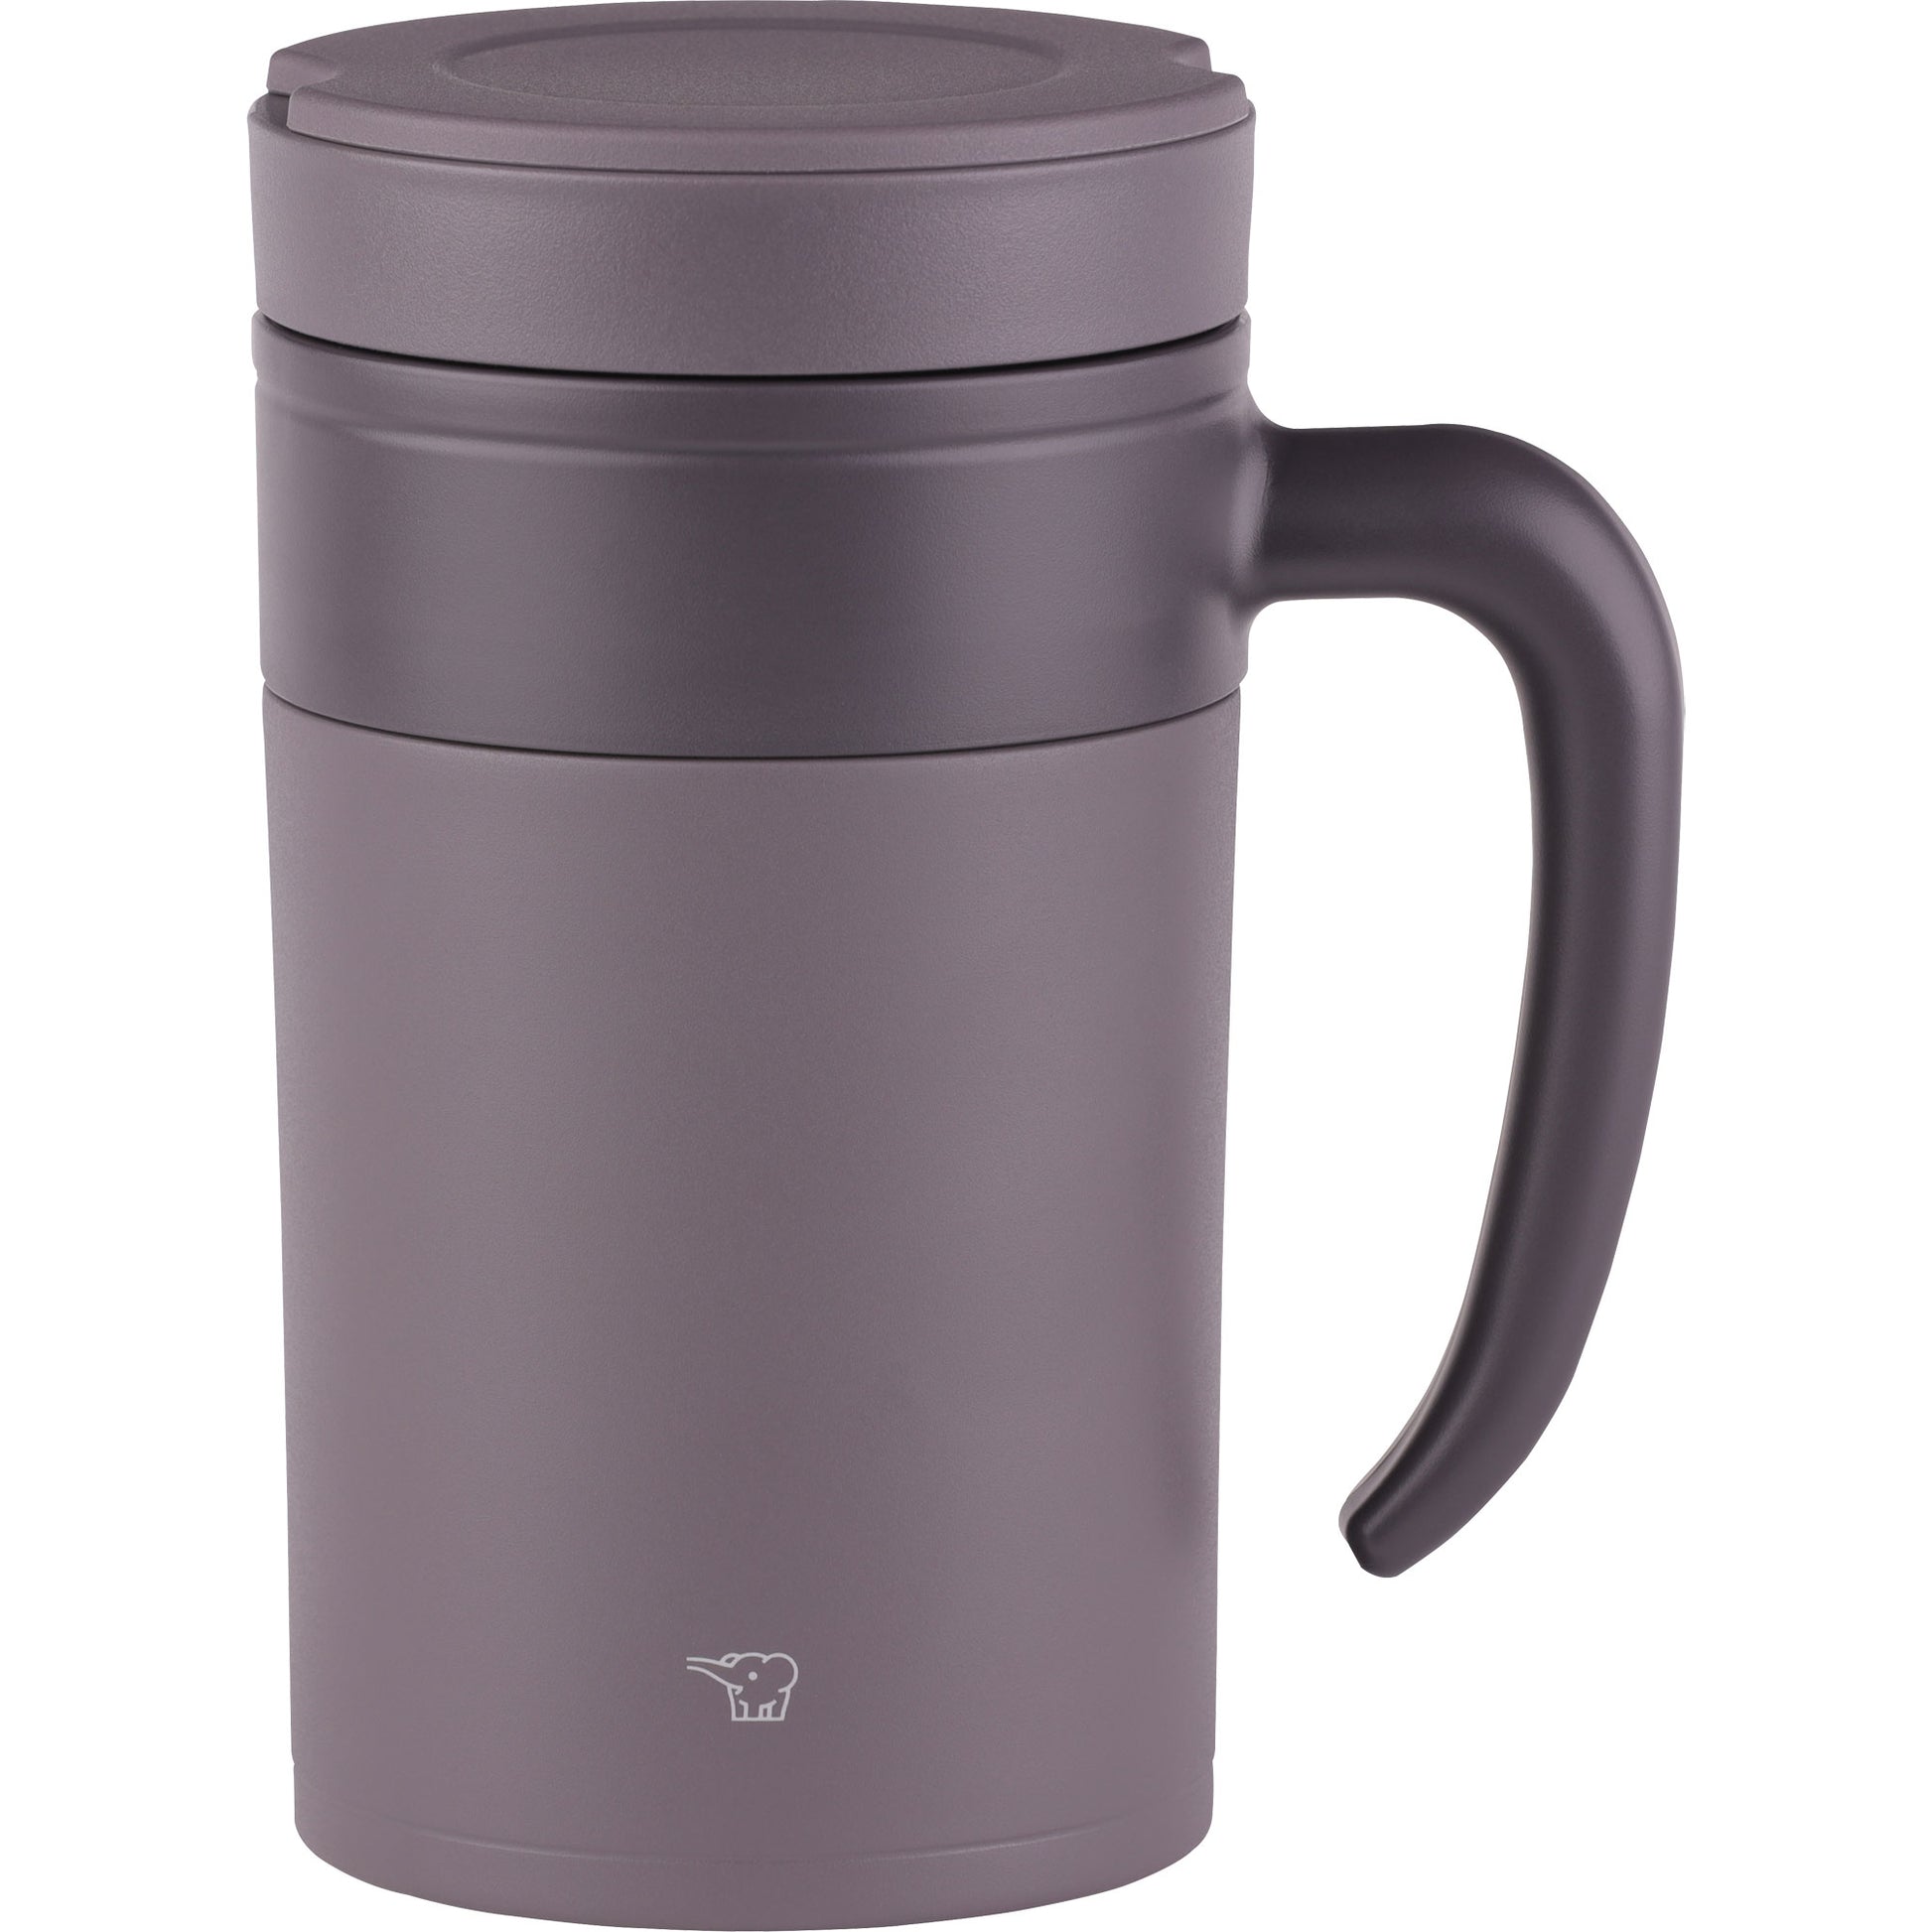 The Zojirushi Stainless Steel Mug Keeps My Drinks Hot for Hours